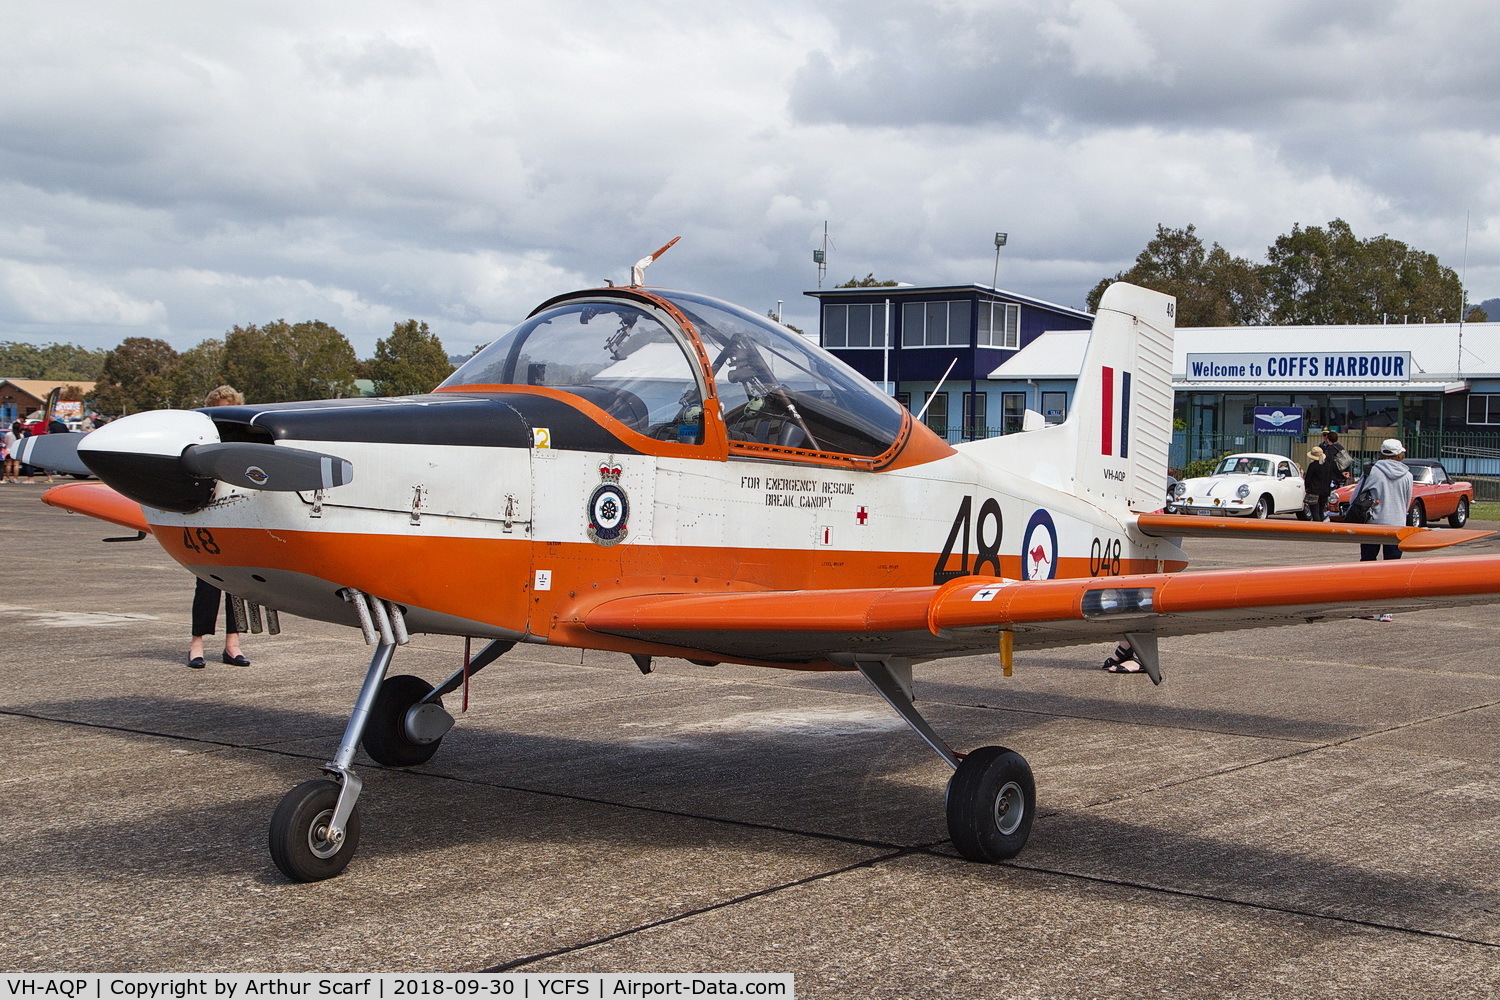 VH-AQP, 1975 New Zealand CT-4A Airtrainer C/N 048, Coffs Harbour Airport 2018